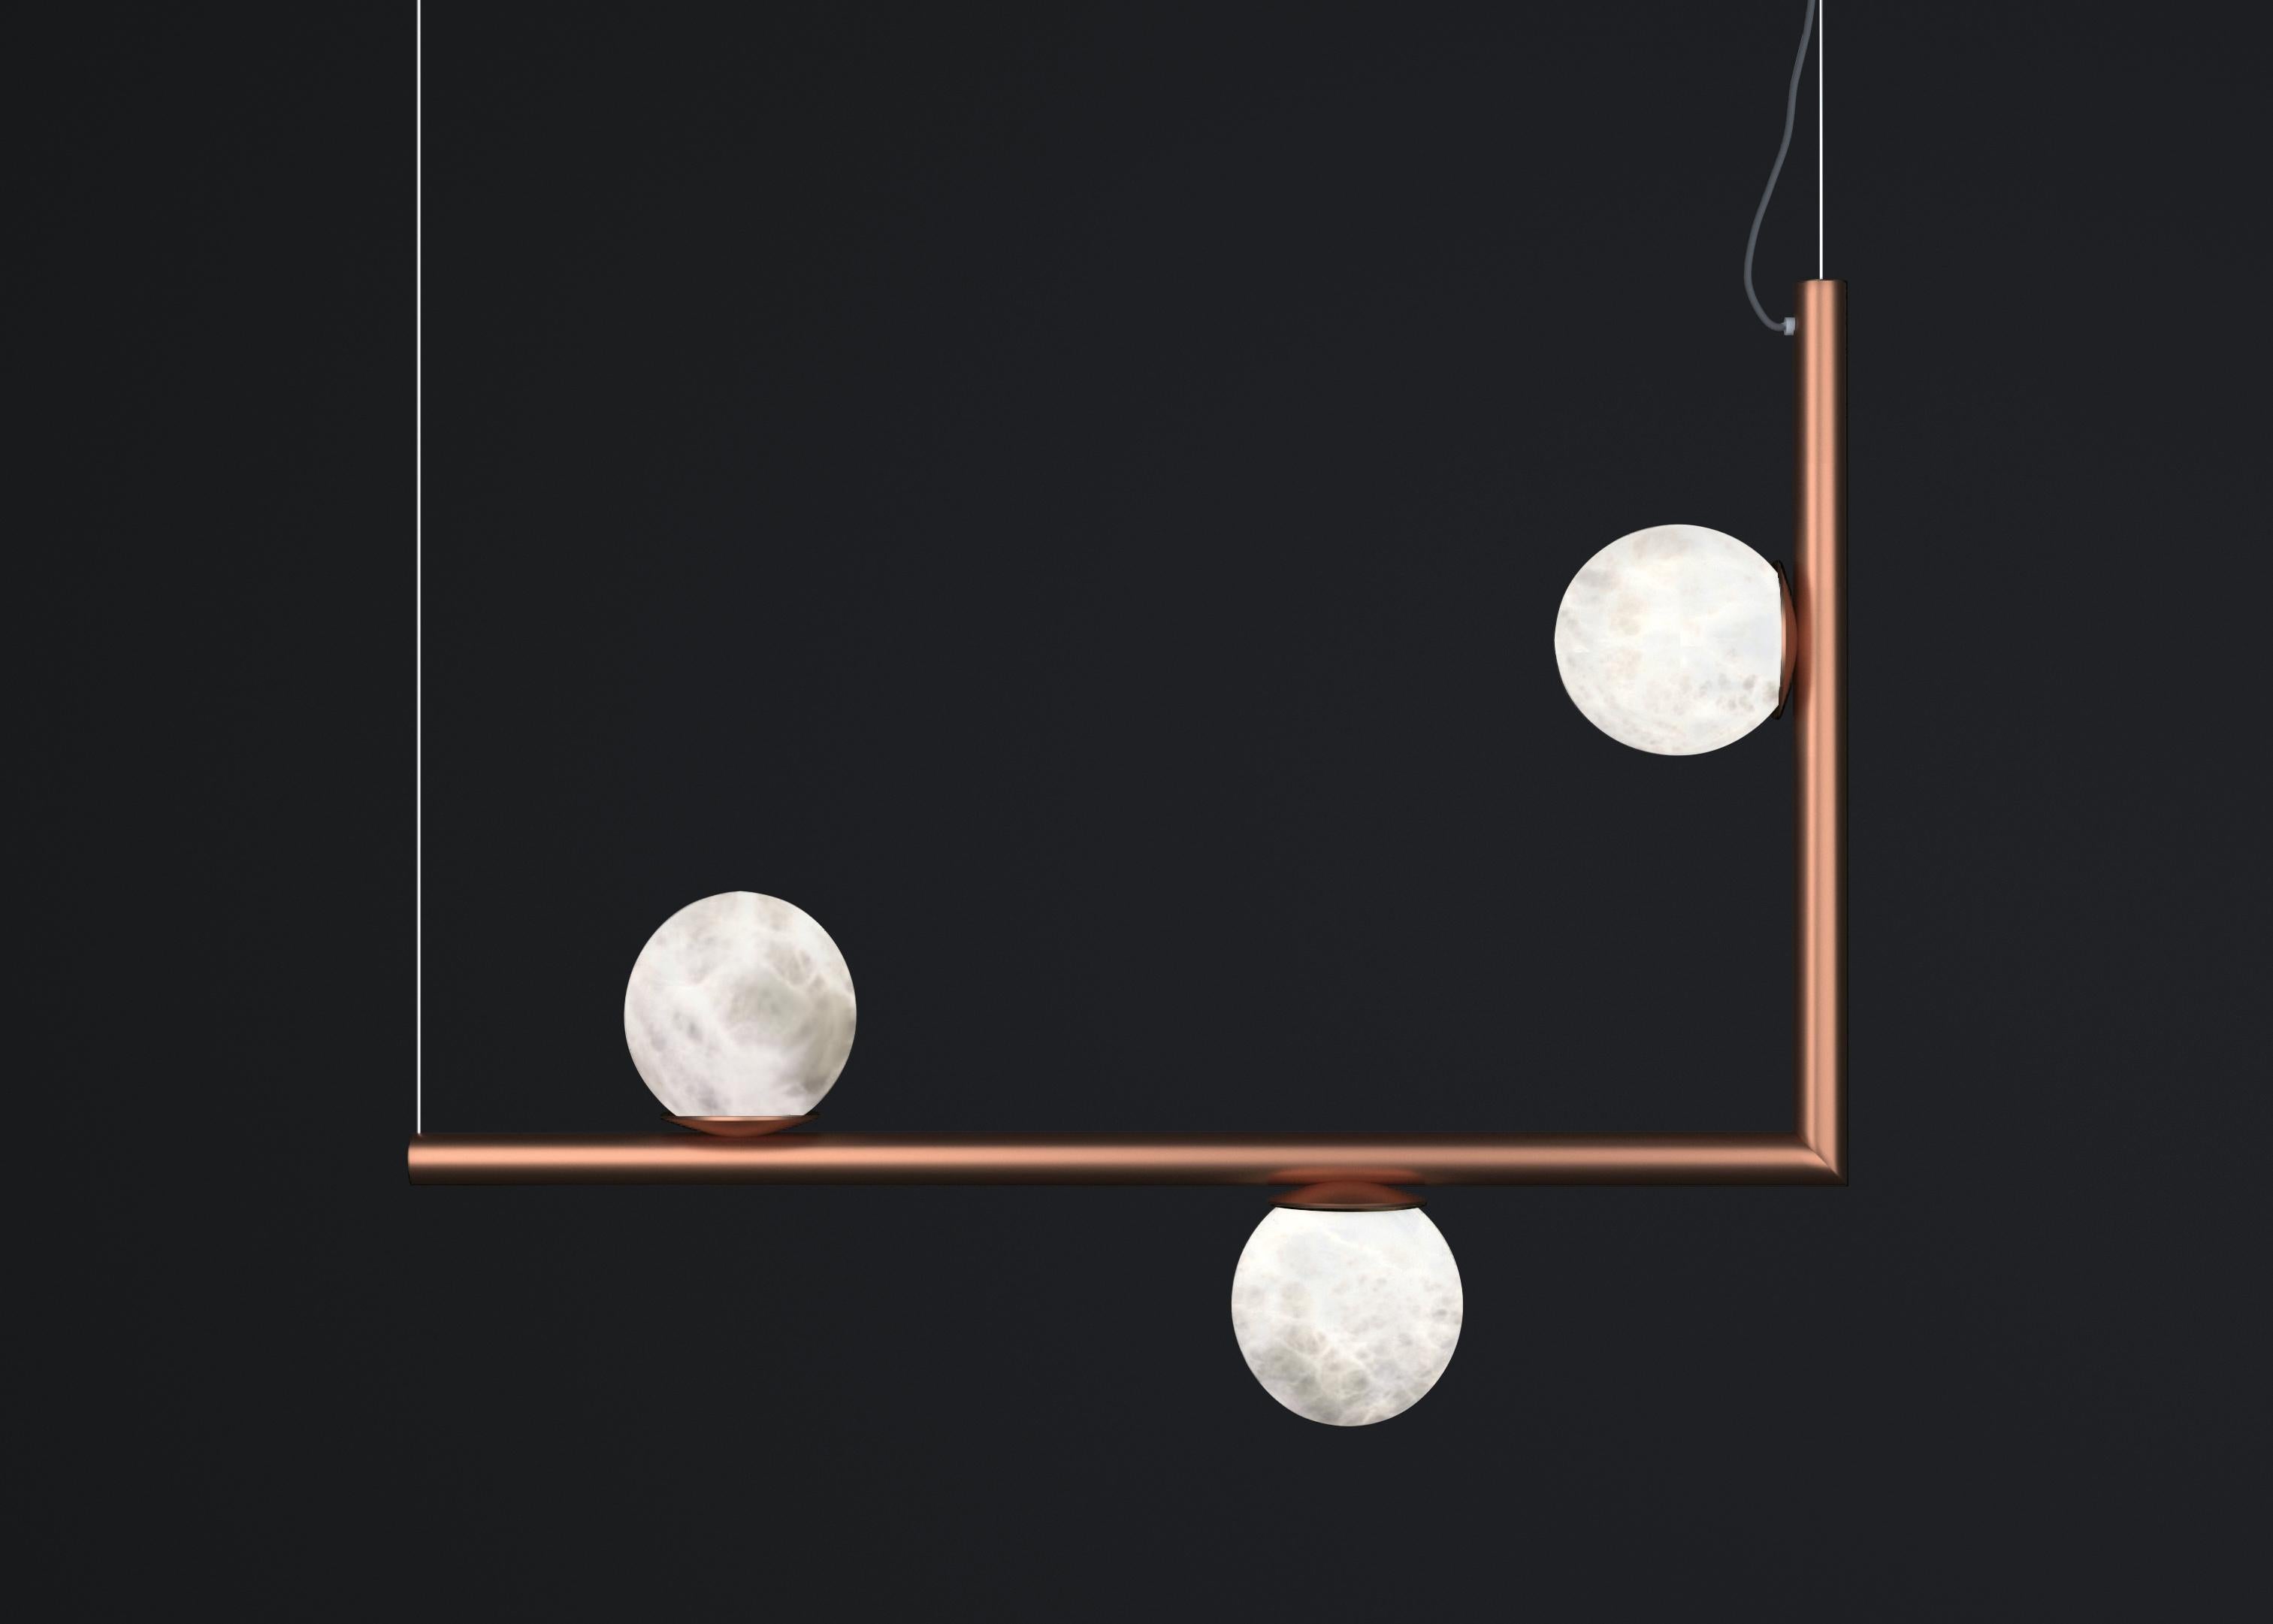 Ofione 1 Copper Pendant Lamp by Alabastro Italiano
Dimensions: D 15 x W 85 x H 64 cm.
Materials: White alabaster and copper.

Available in different finishes: Shiny Silver, Bronze, Brushed Brass, Ruggine of Florence, Brushed Burnished, Shiny Gold,